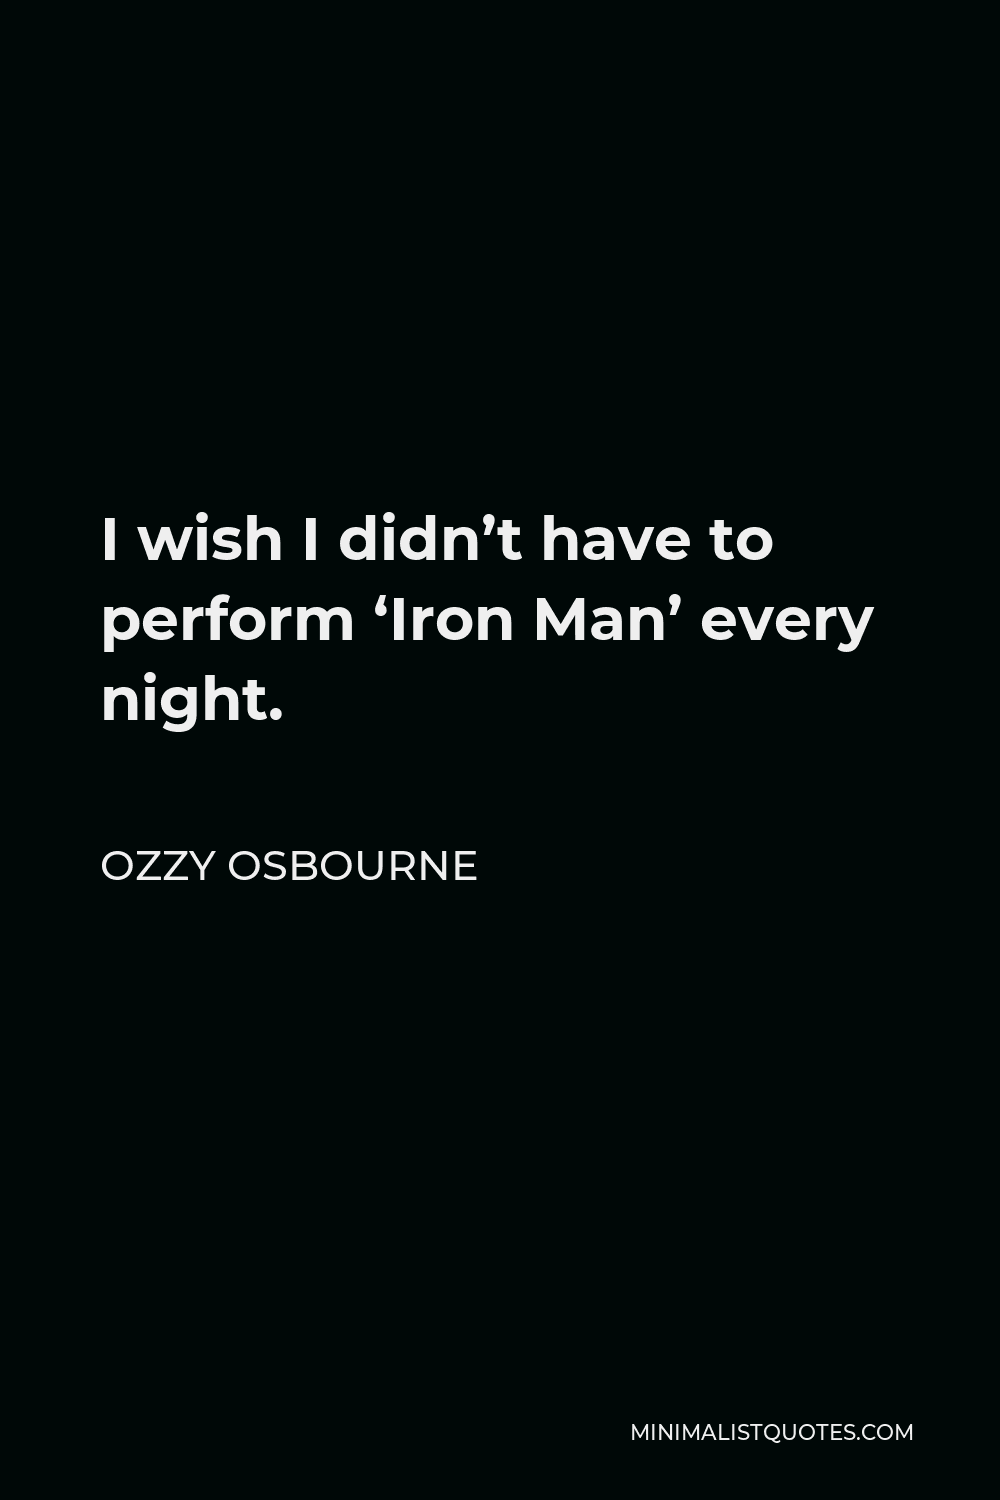 Ozzy Osbourne Quote - I wish I didn’t have to perform ‘Iron Man’ every night.